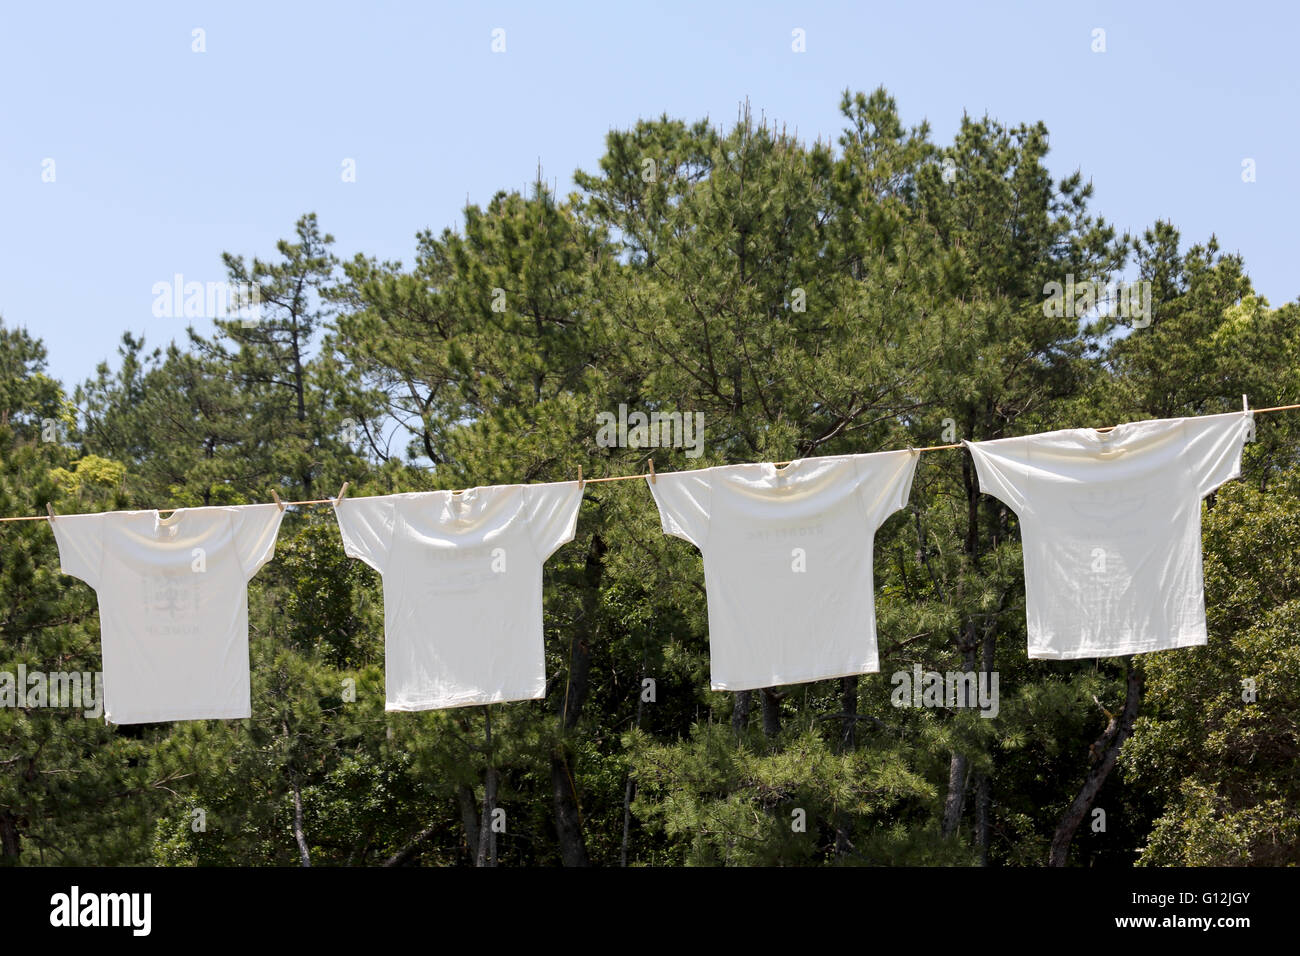 White laundry hanging on the clothesline against blue sky Stock Photo